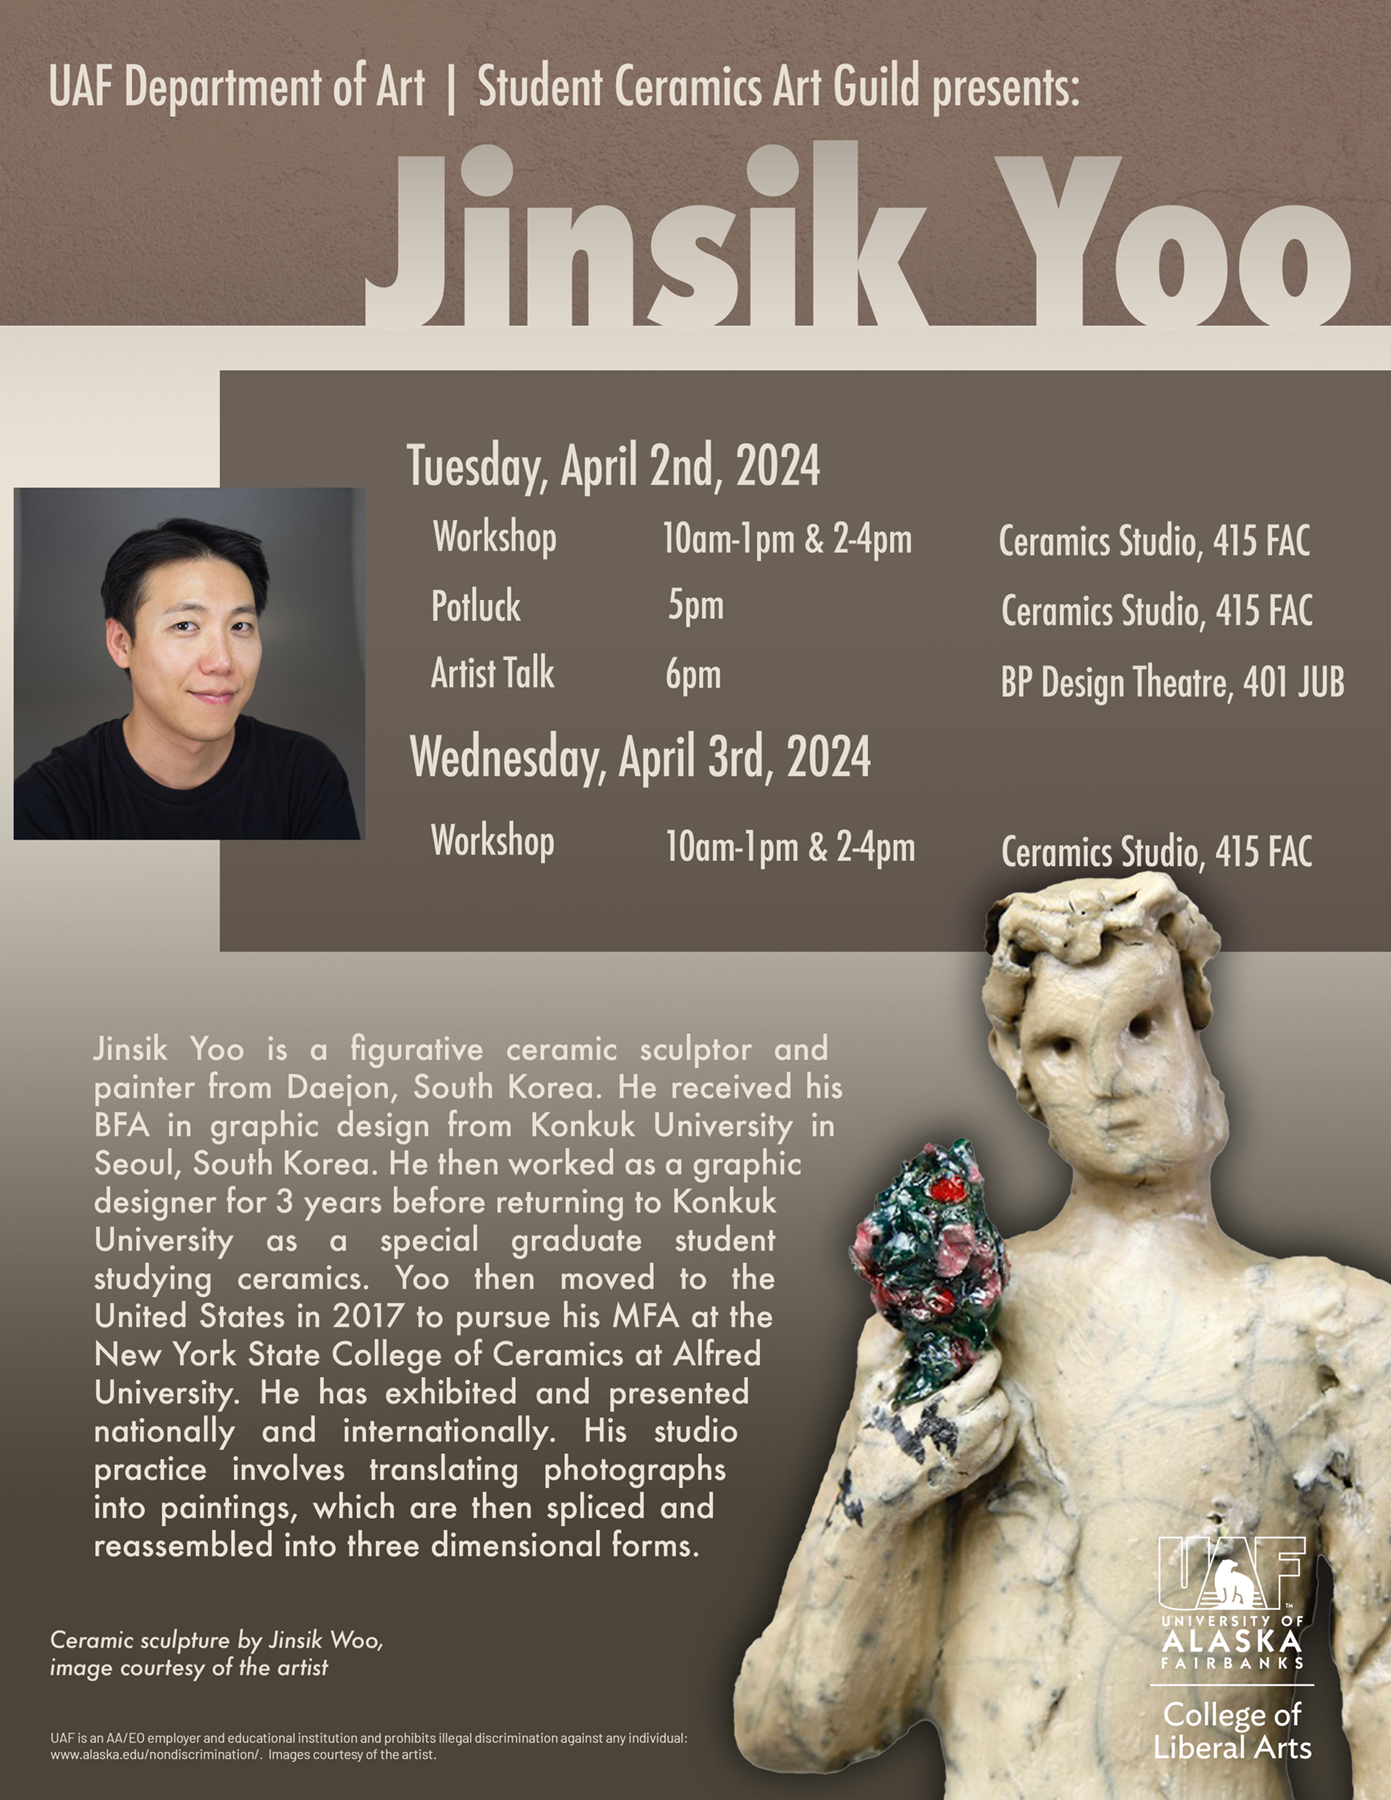 Poster advertising a lecture and potluck from visiting artist Jinsik Yoo. UAF image.